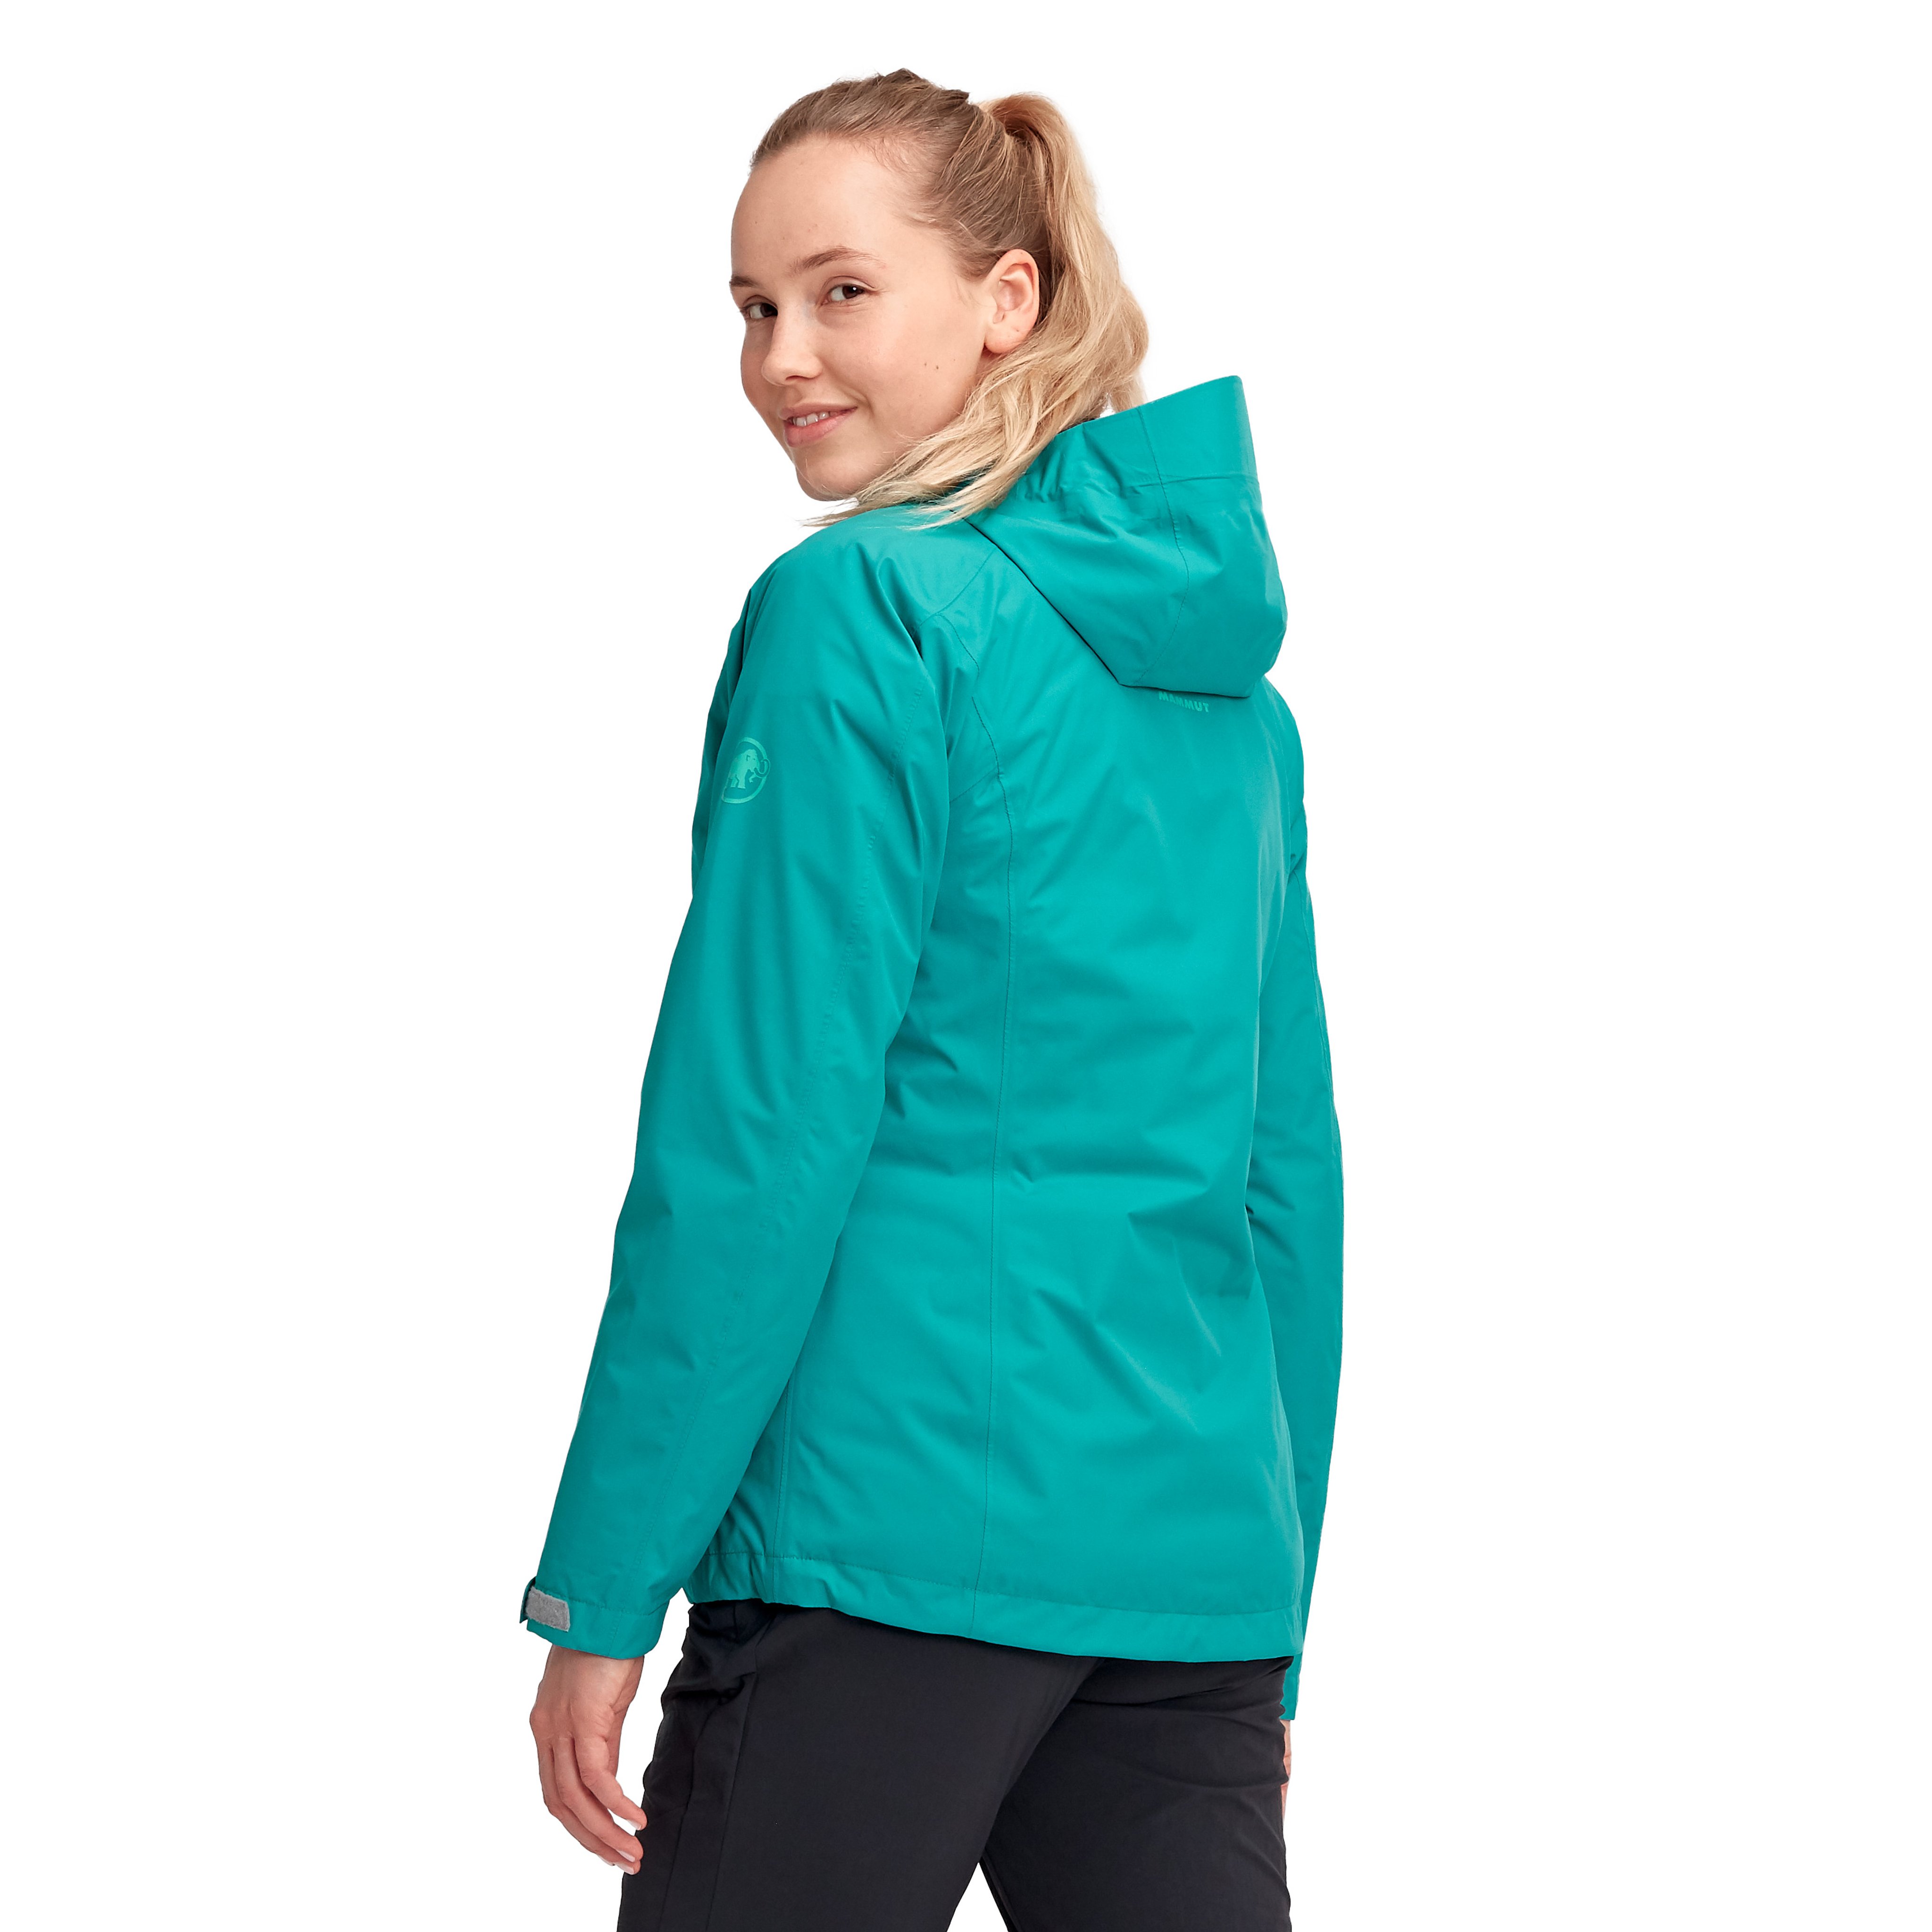 Convey 3 in 1 HS Hooded Jacket Women product image